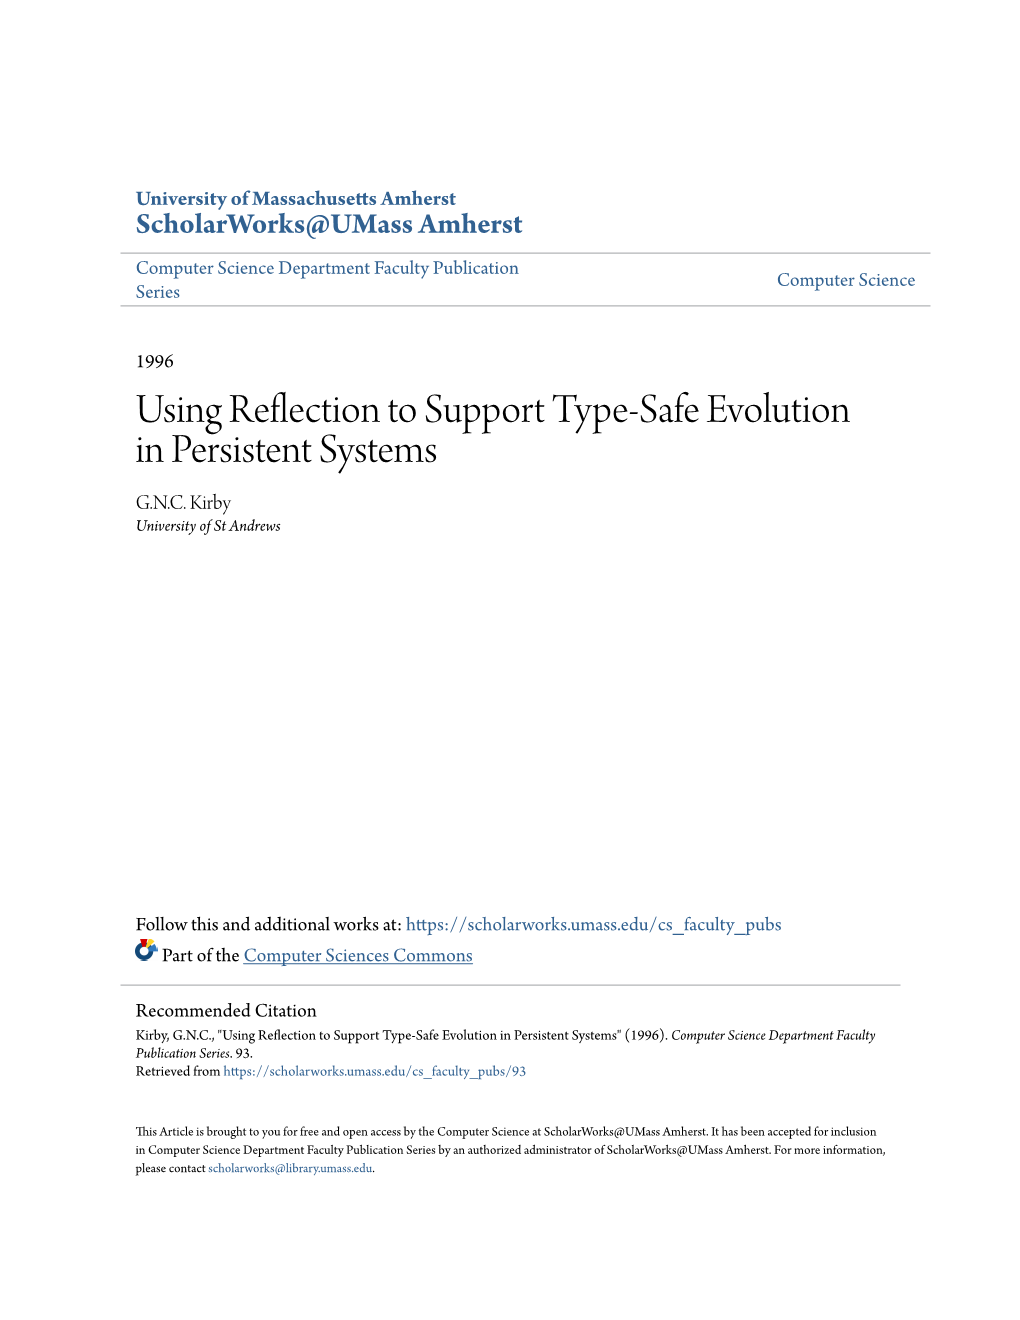 Using Reflection to Support Type-Safe Evolution in Persistent Systems G.N.C